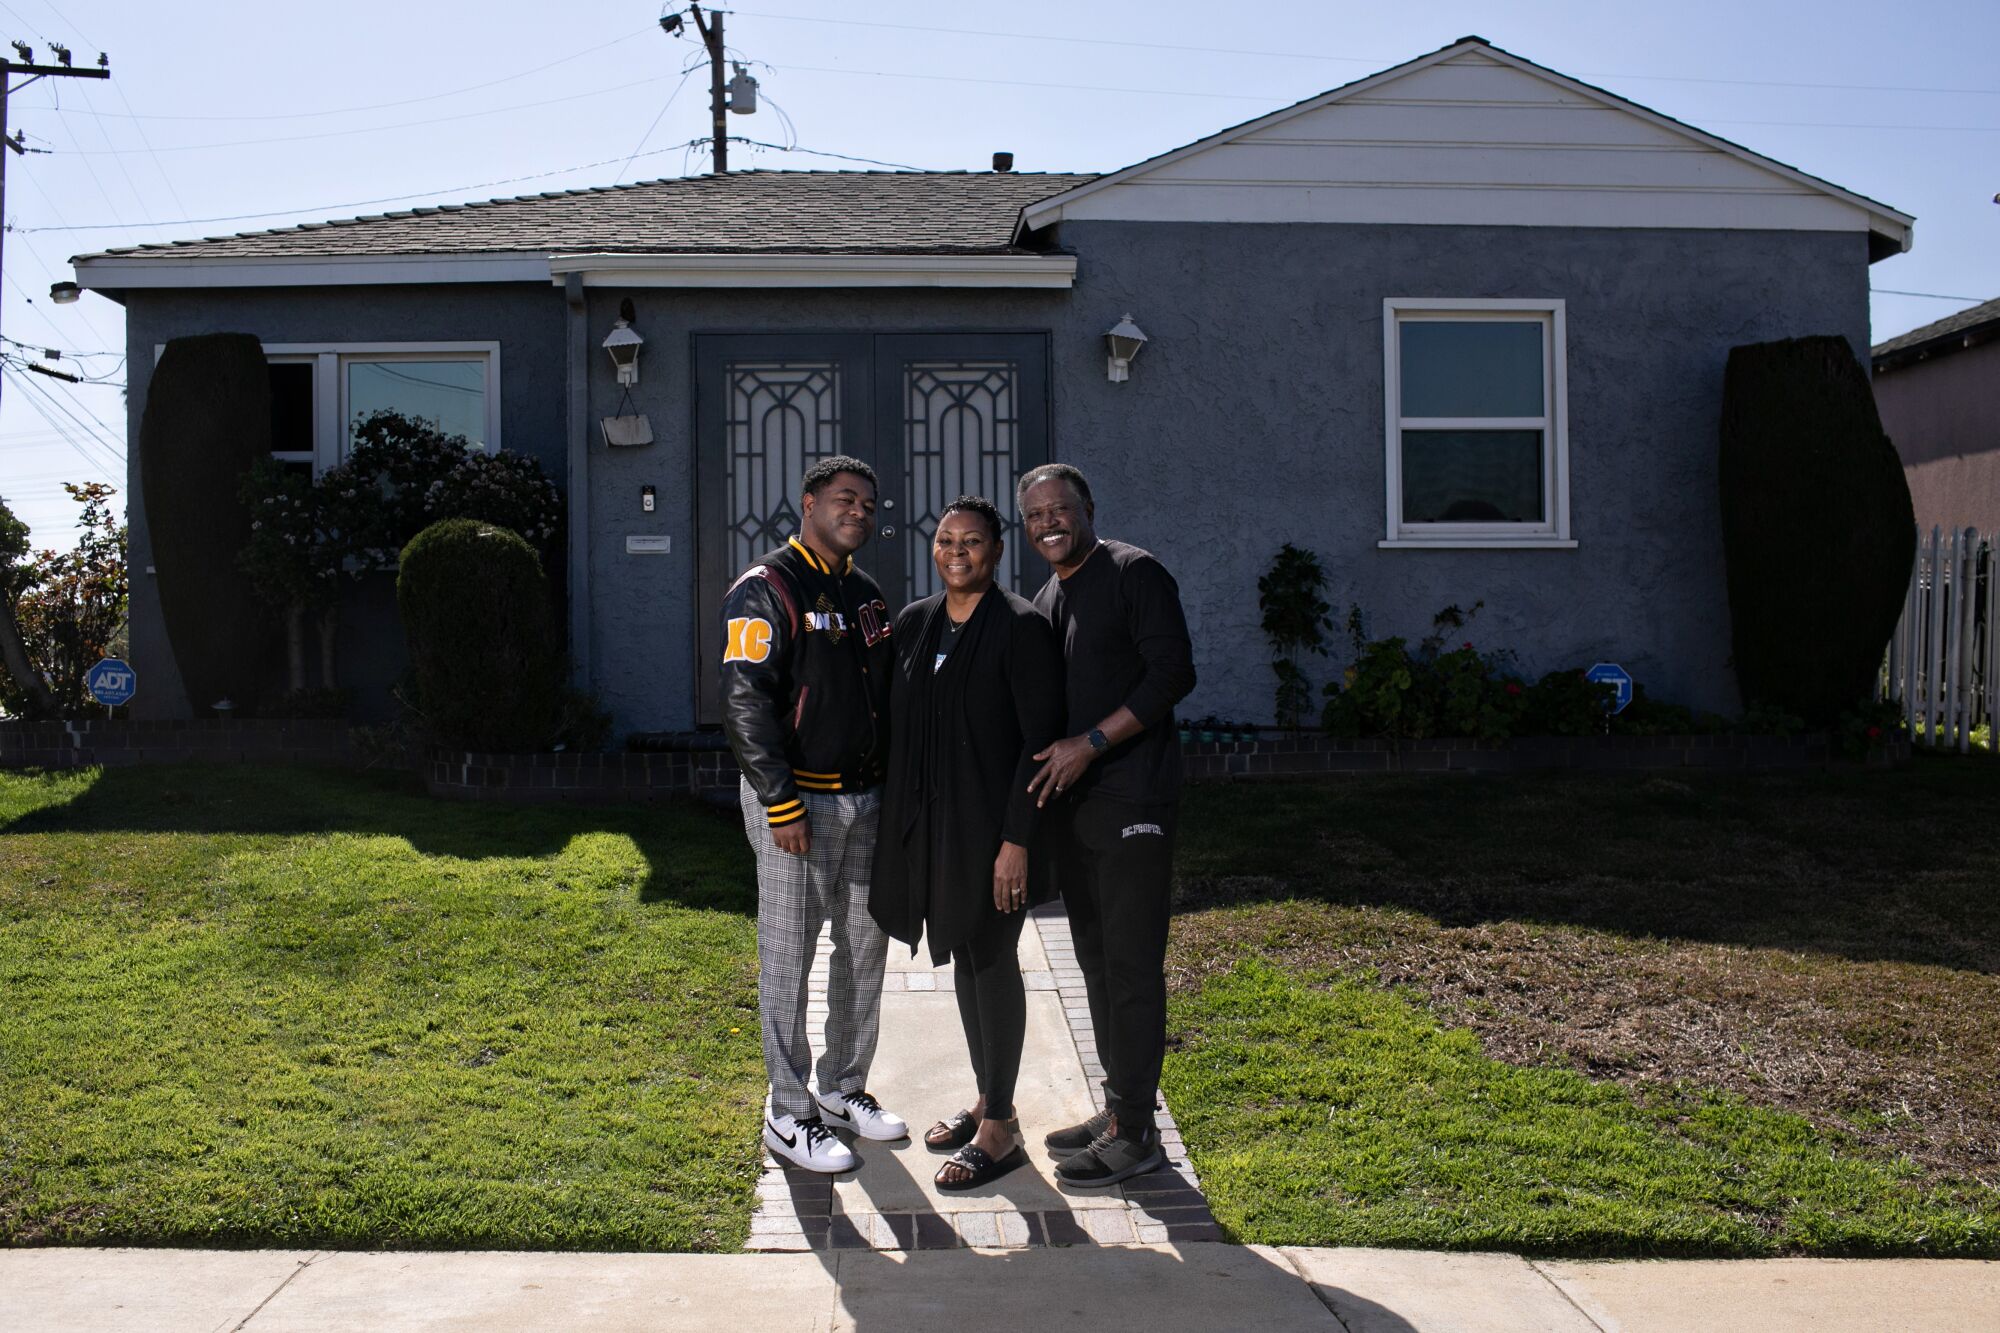 A man stands with his parents outside a modest house.